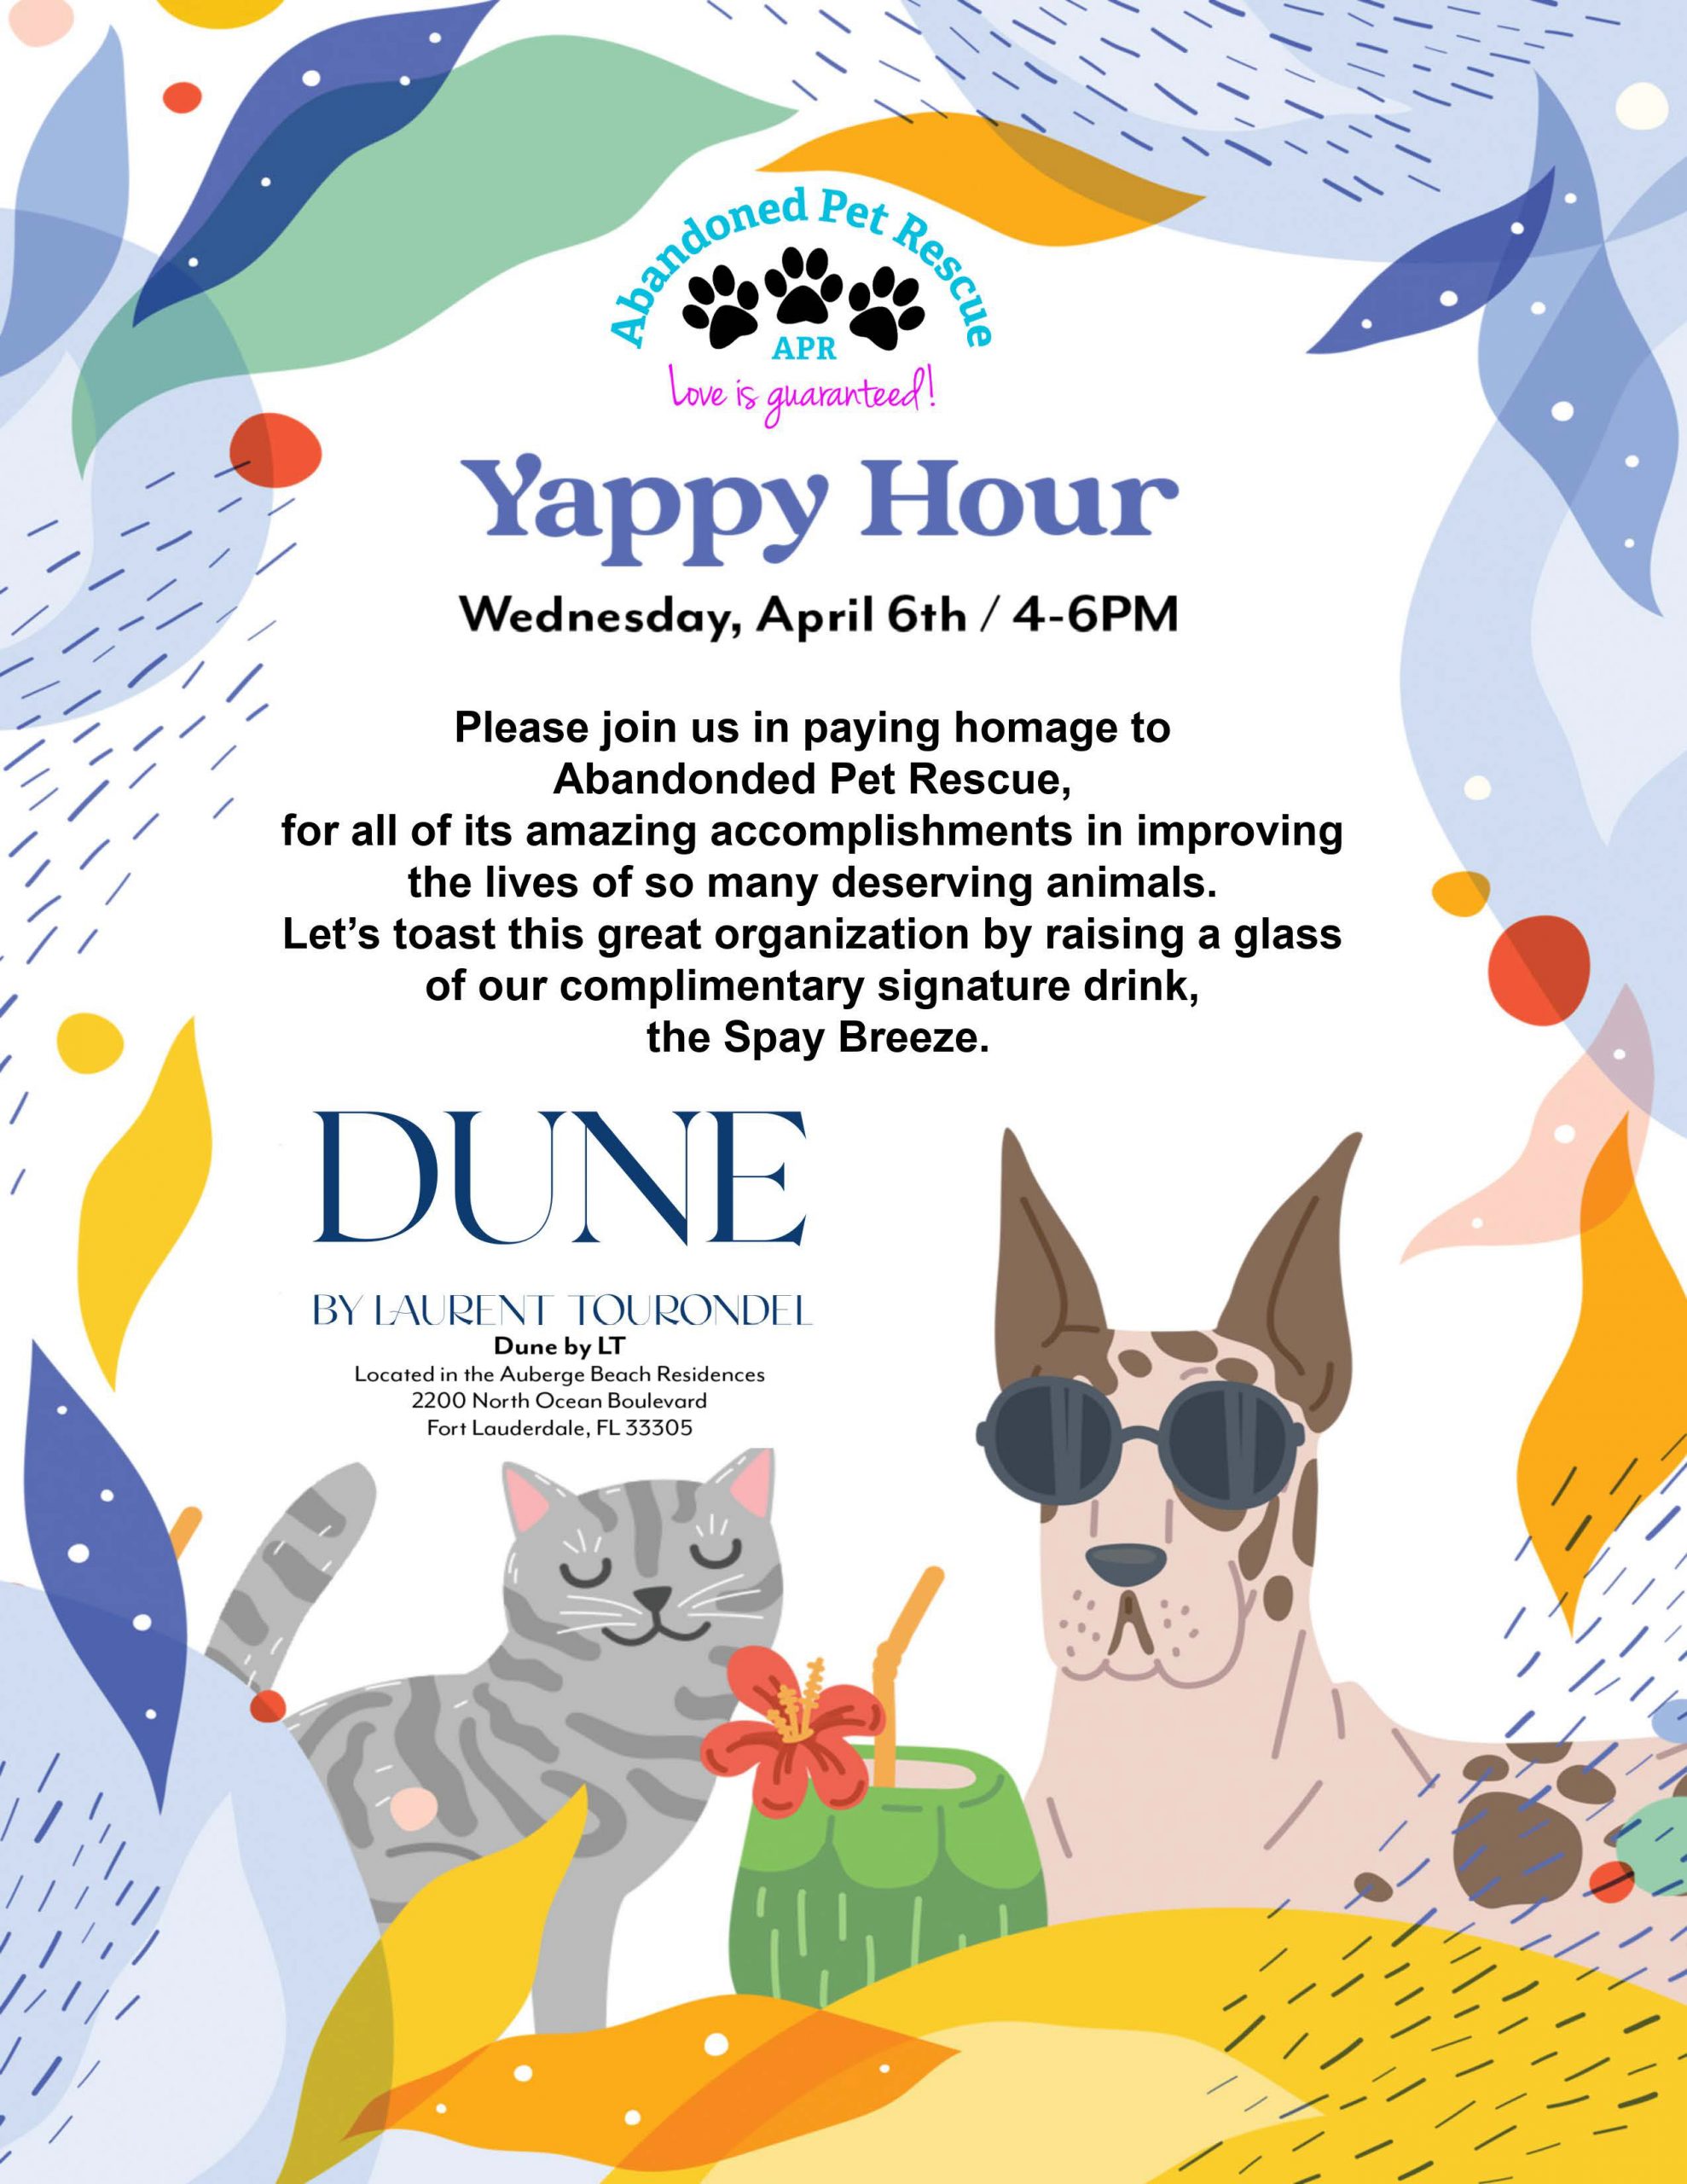 APR YAPPY HOUR AT DUNE BY LAURENT TOURONDEL (4/6) @ Dune By Laurent Tournondel | Fort Lauderdale | Florida | United States